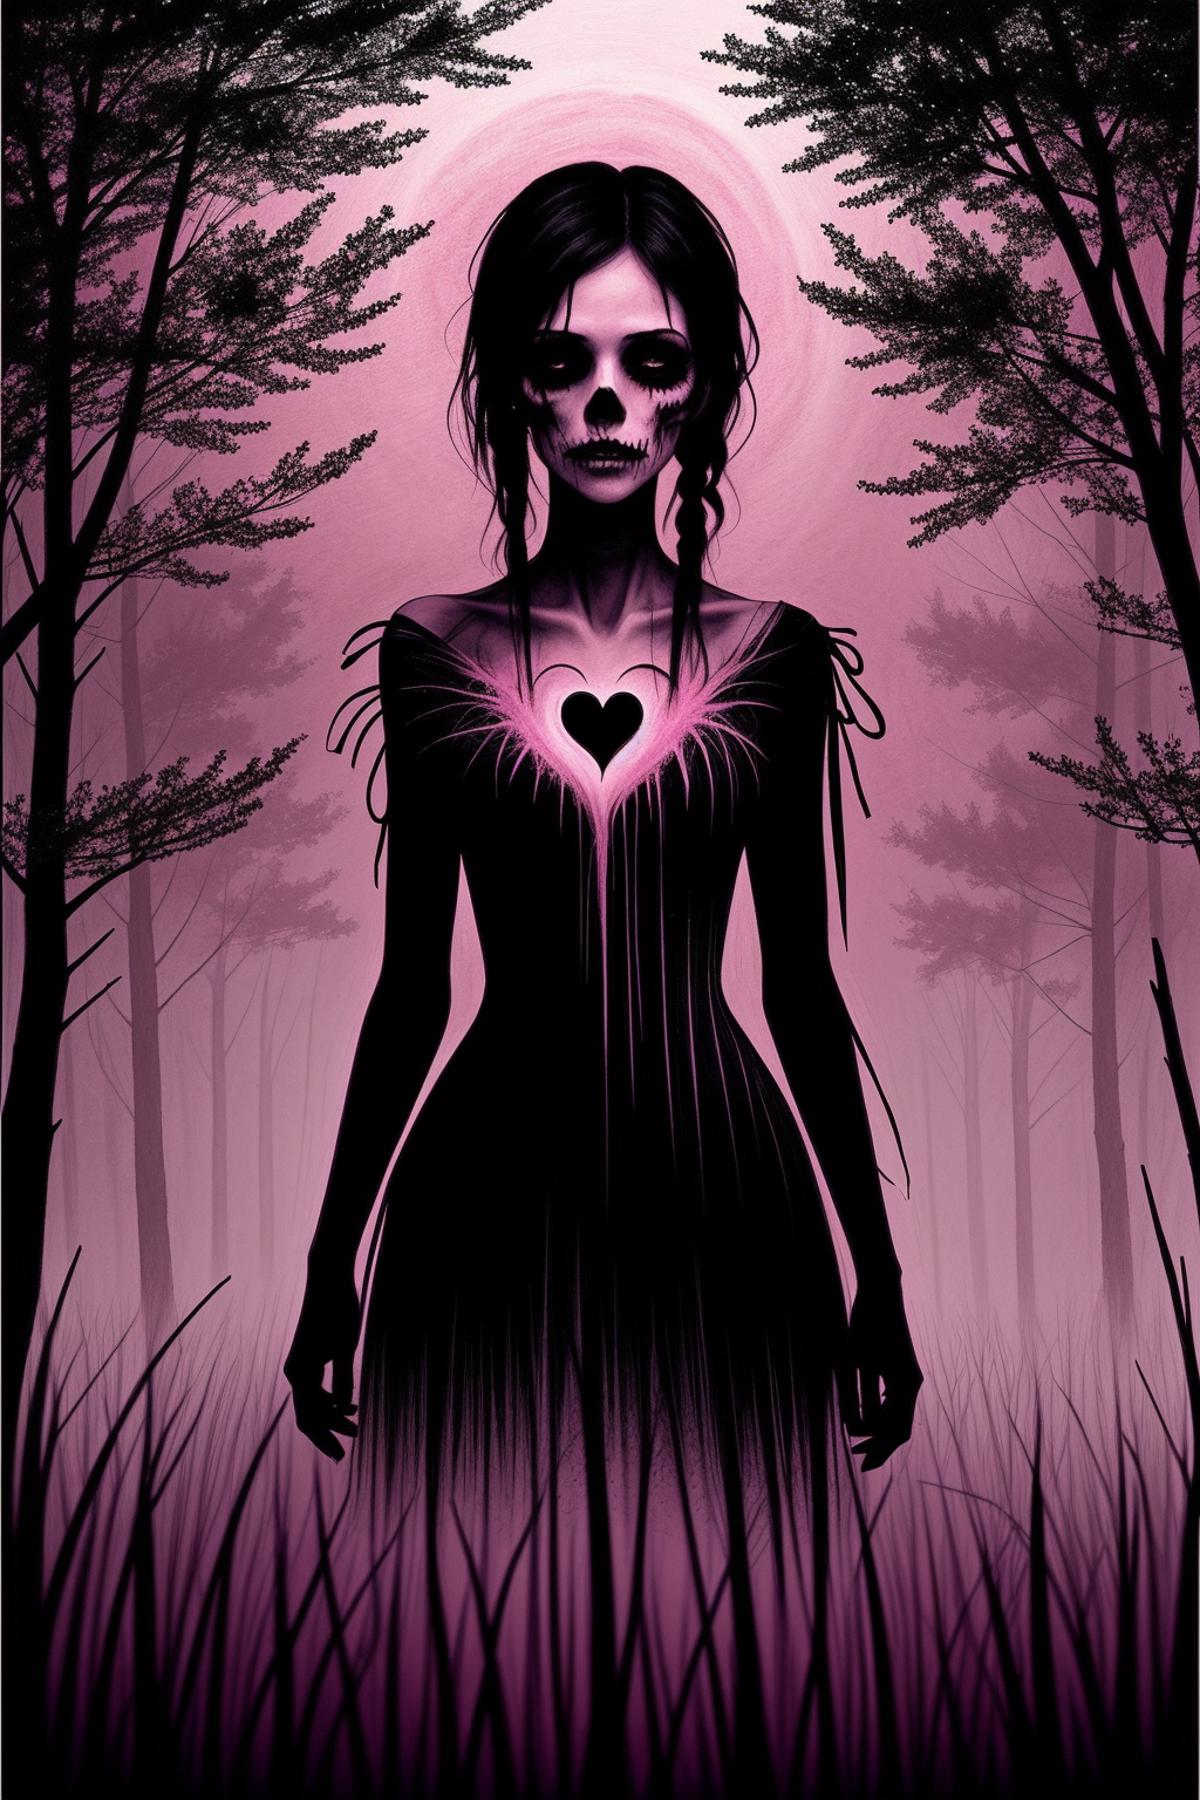 A woman with a heart on her chest standing in a dark forest.